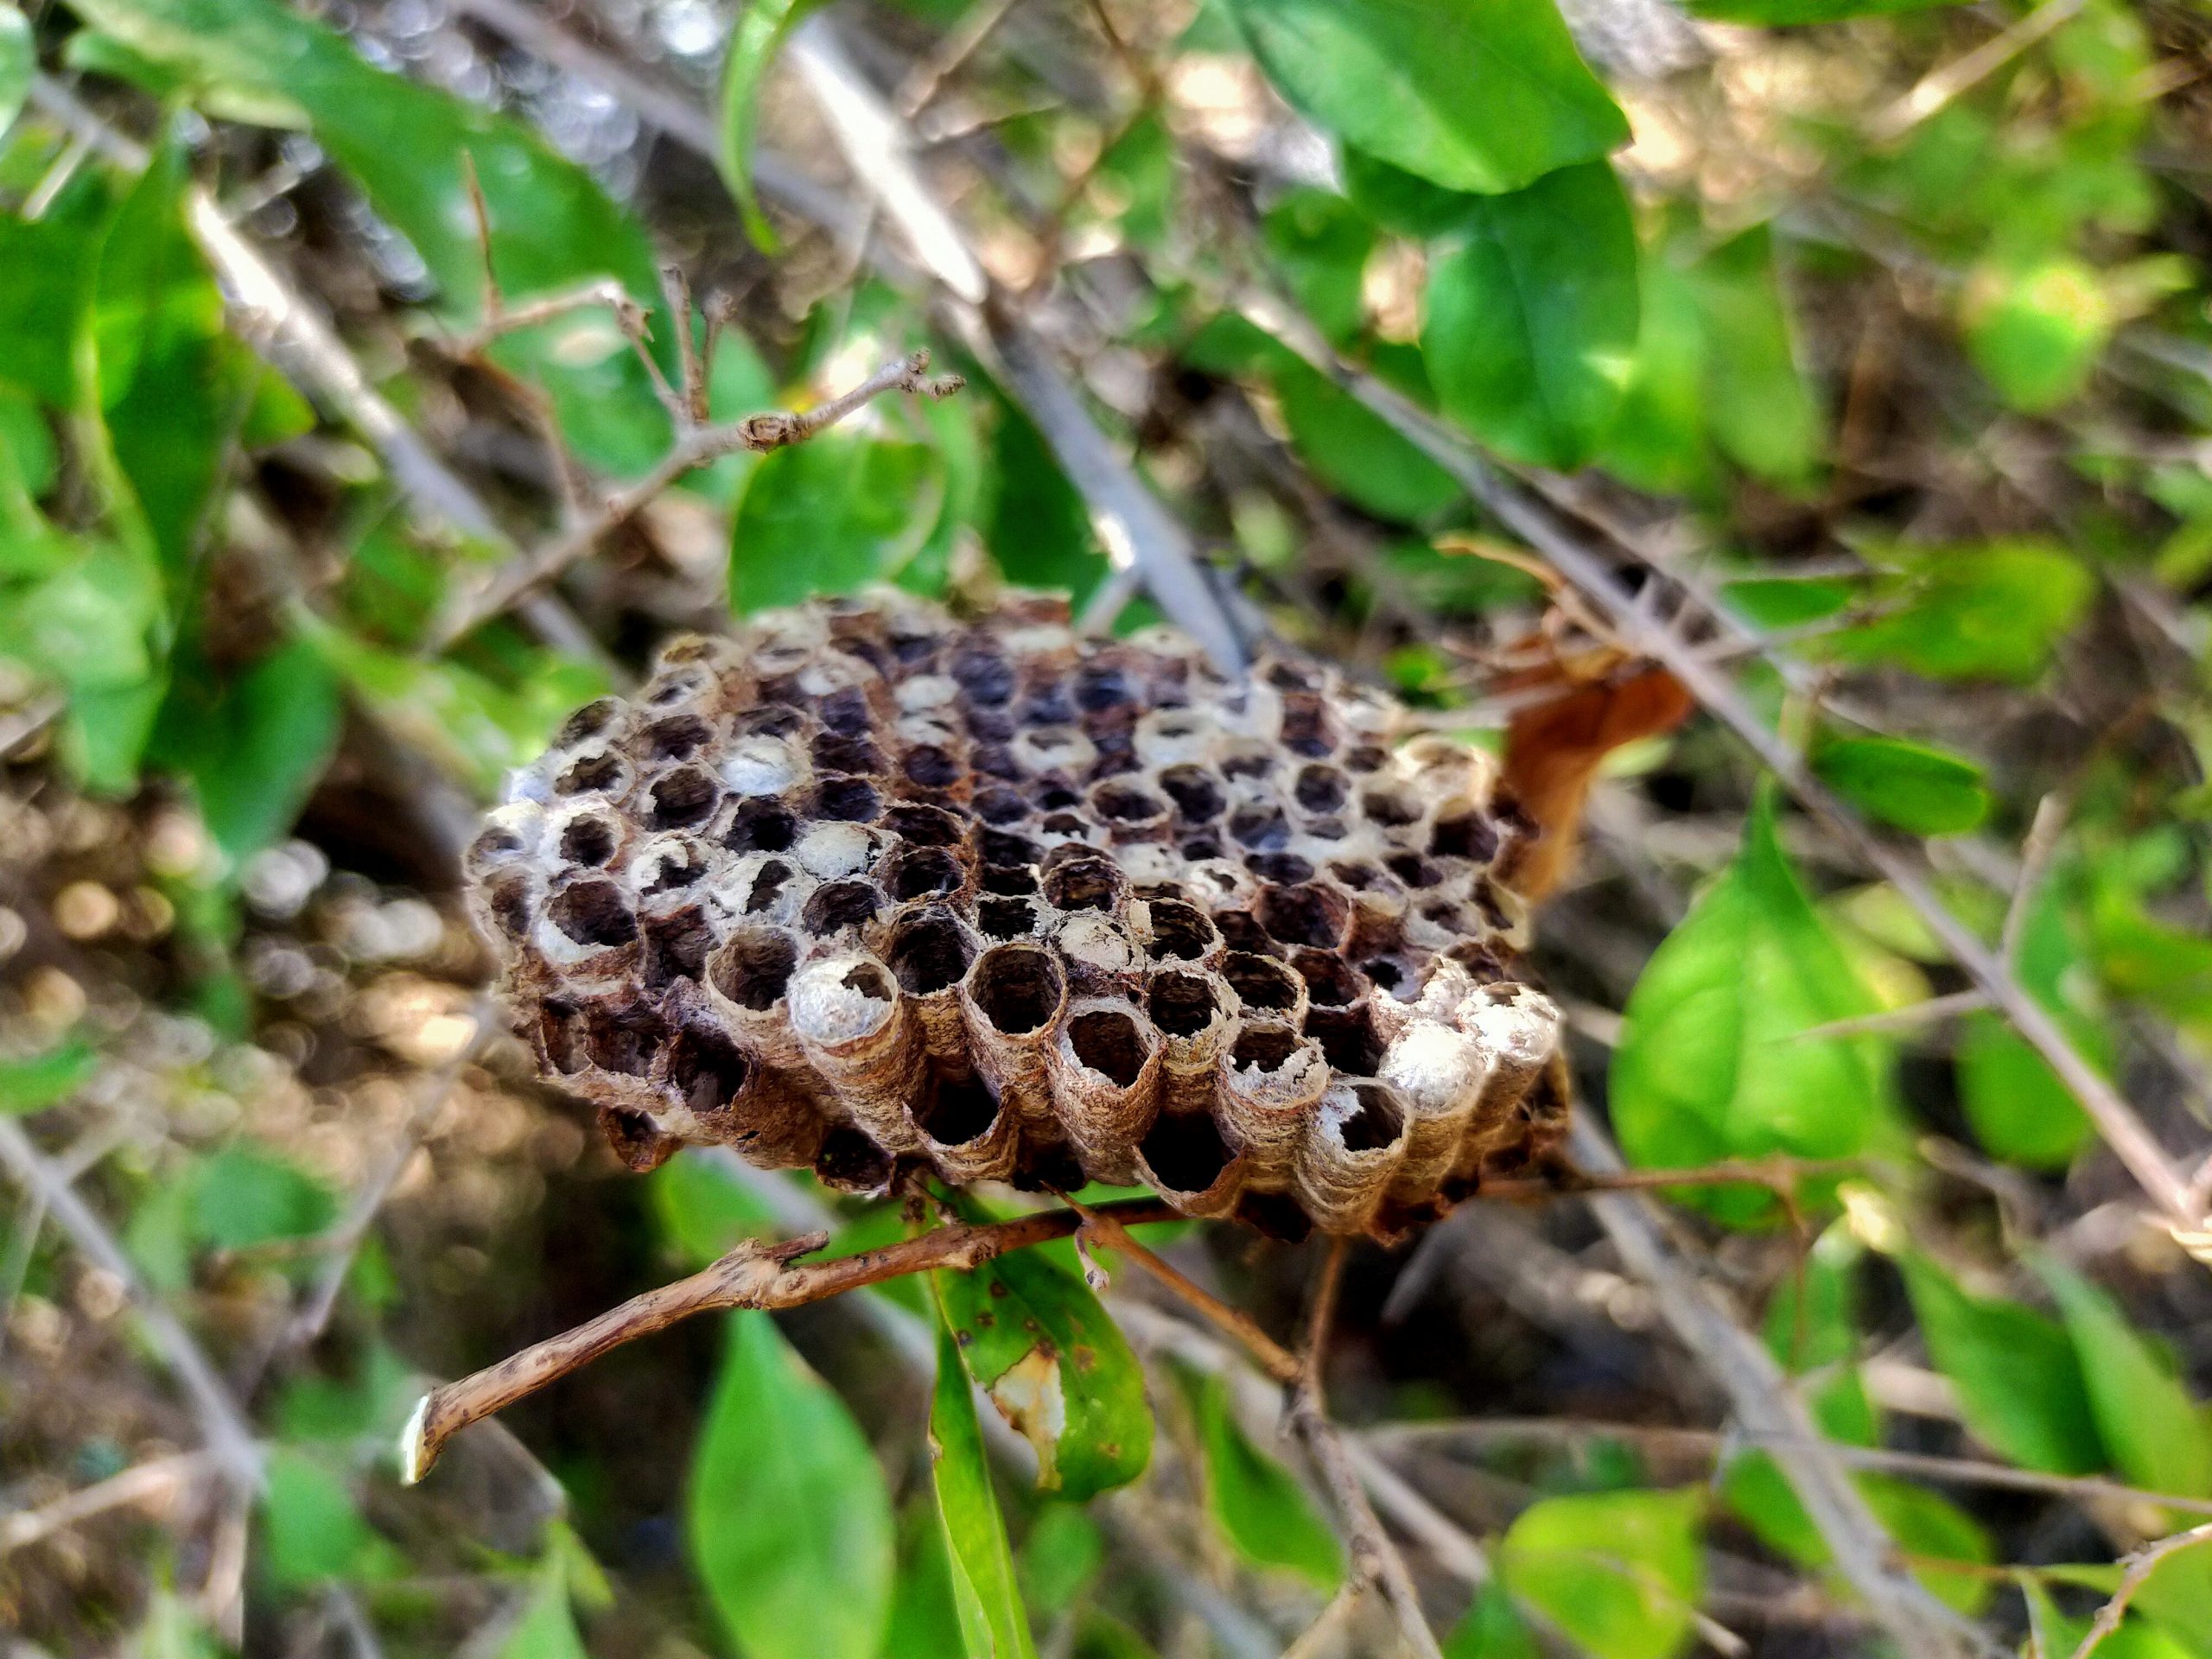 An insect nest on plant